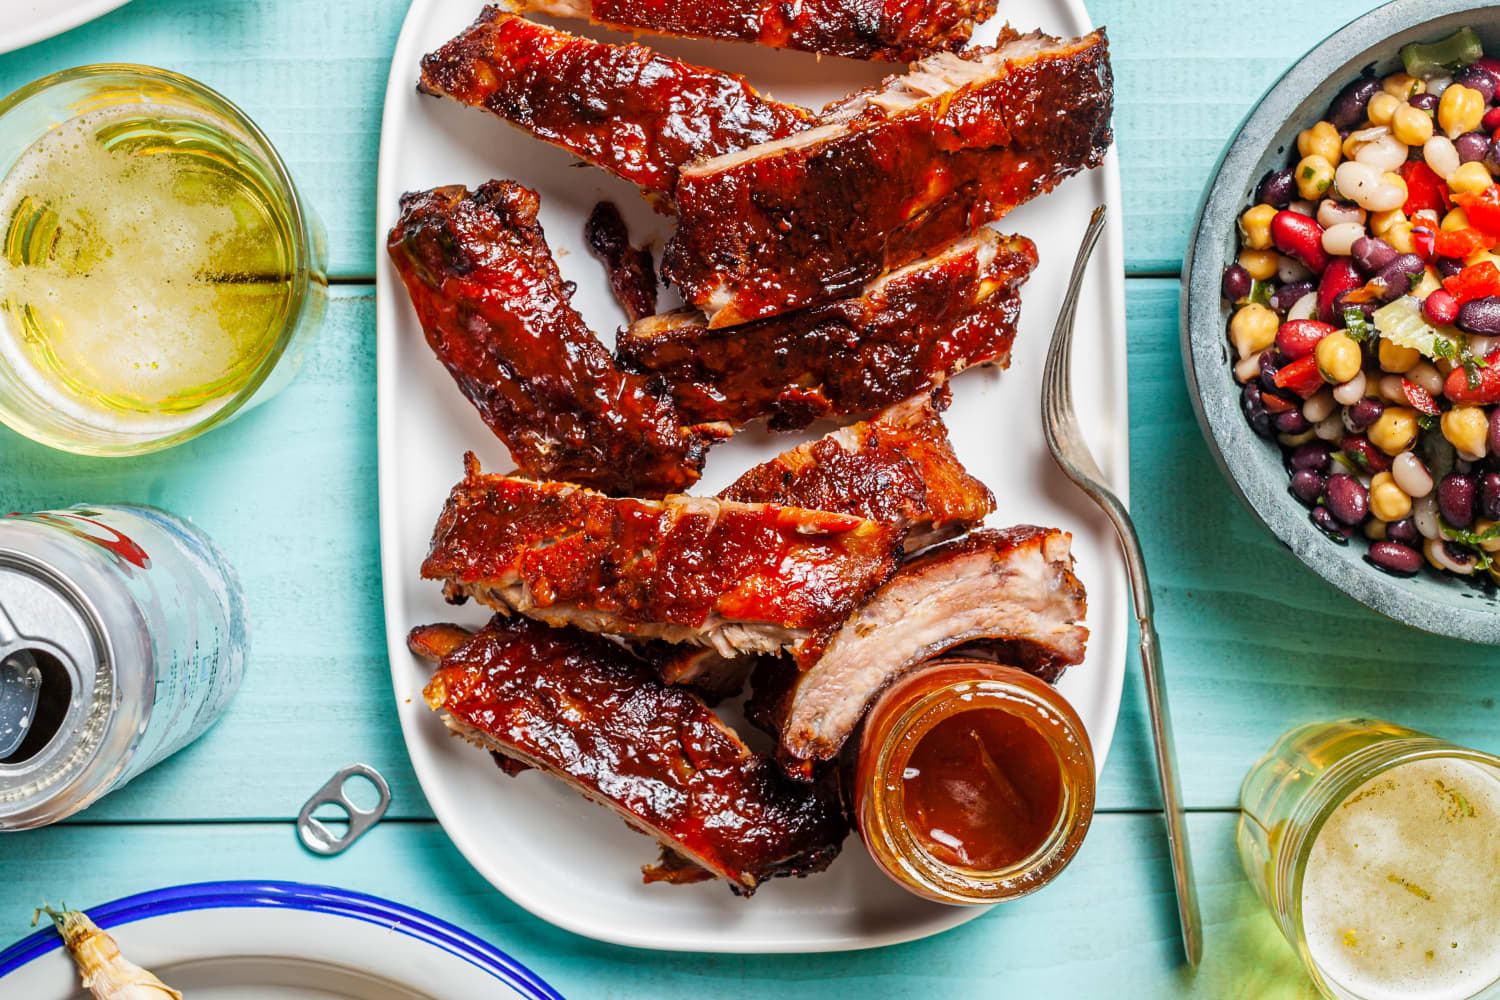 Easy and Quick Grilled Foil-Wrapped Ribs - With Peanut Butter on Top